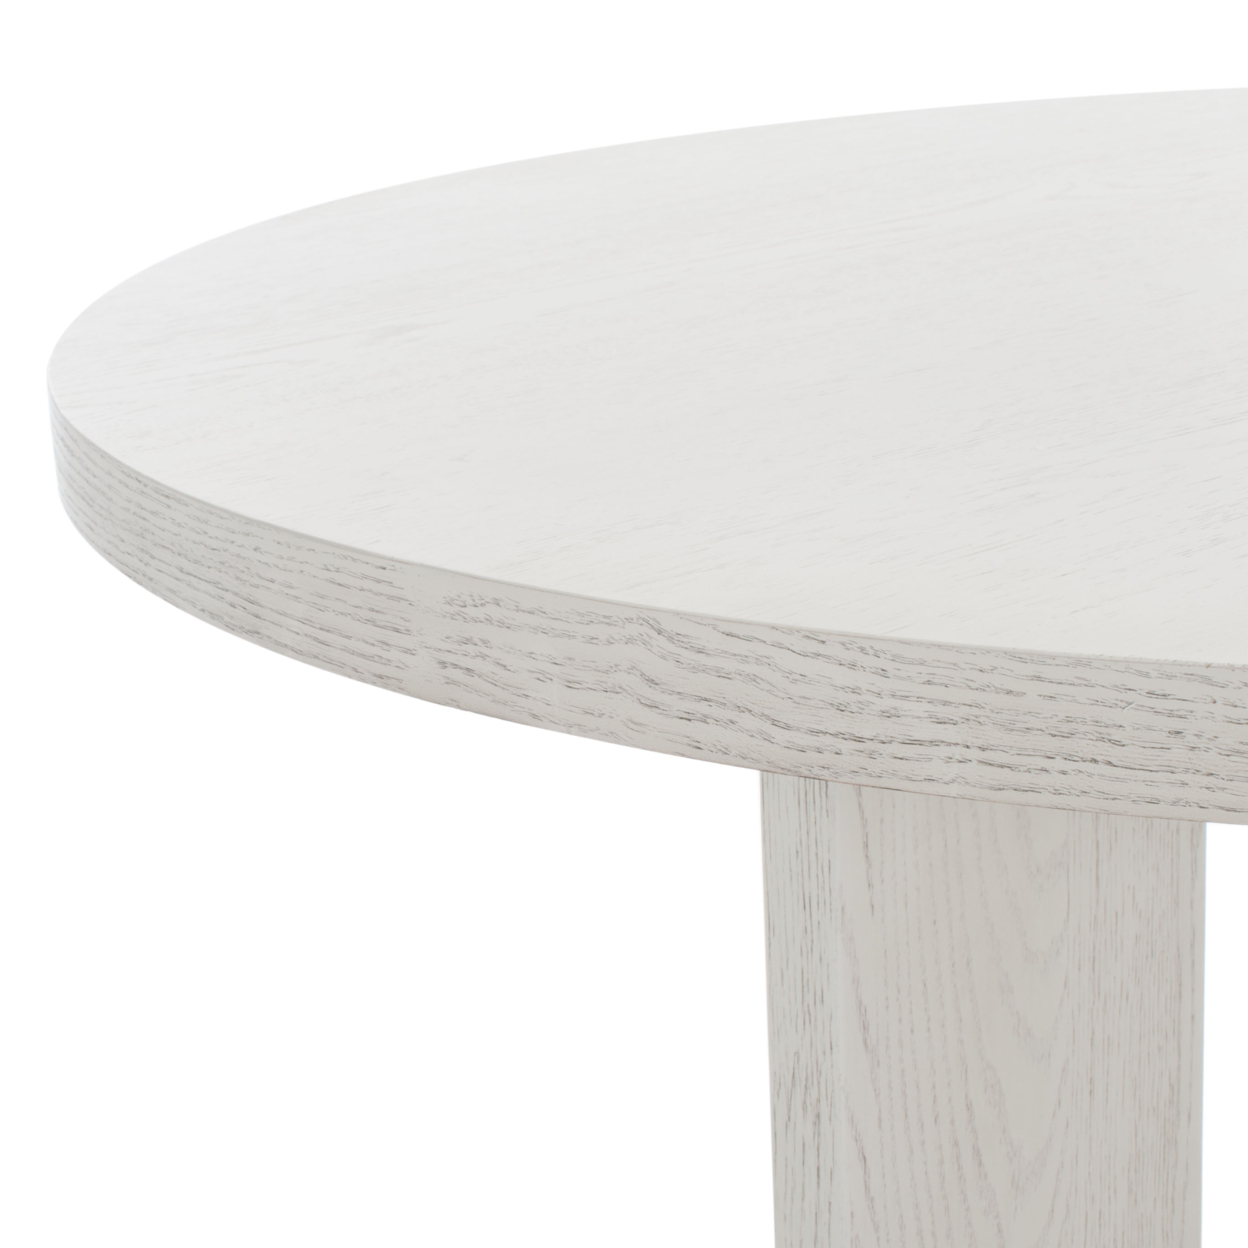 SAFAVIEH COUTURE Calamaria Round Wood Dn Table White Washed